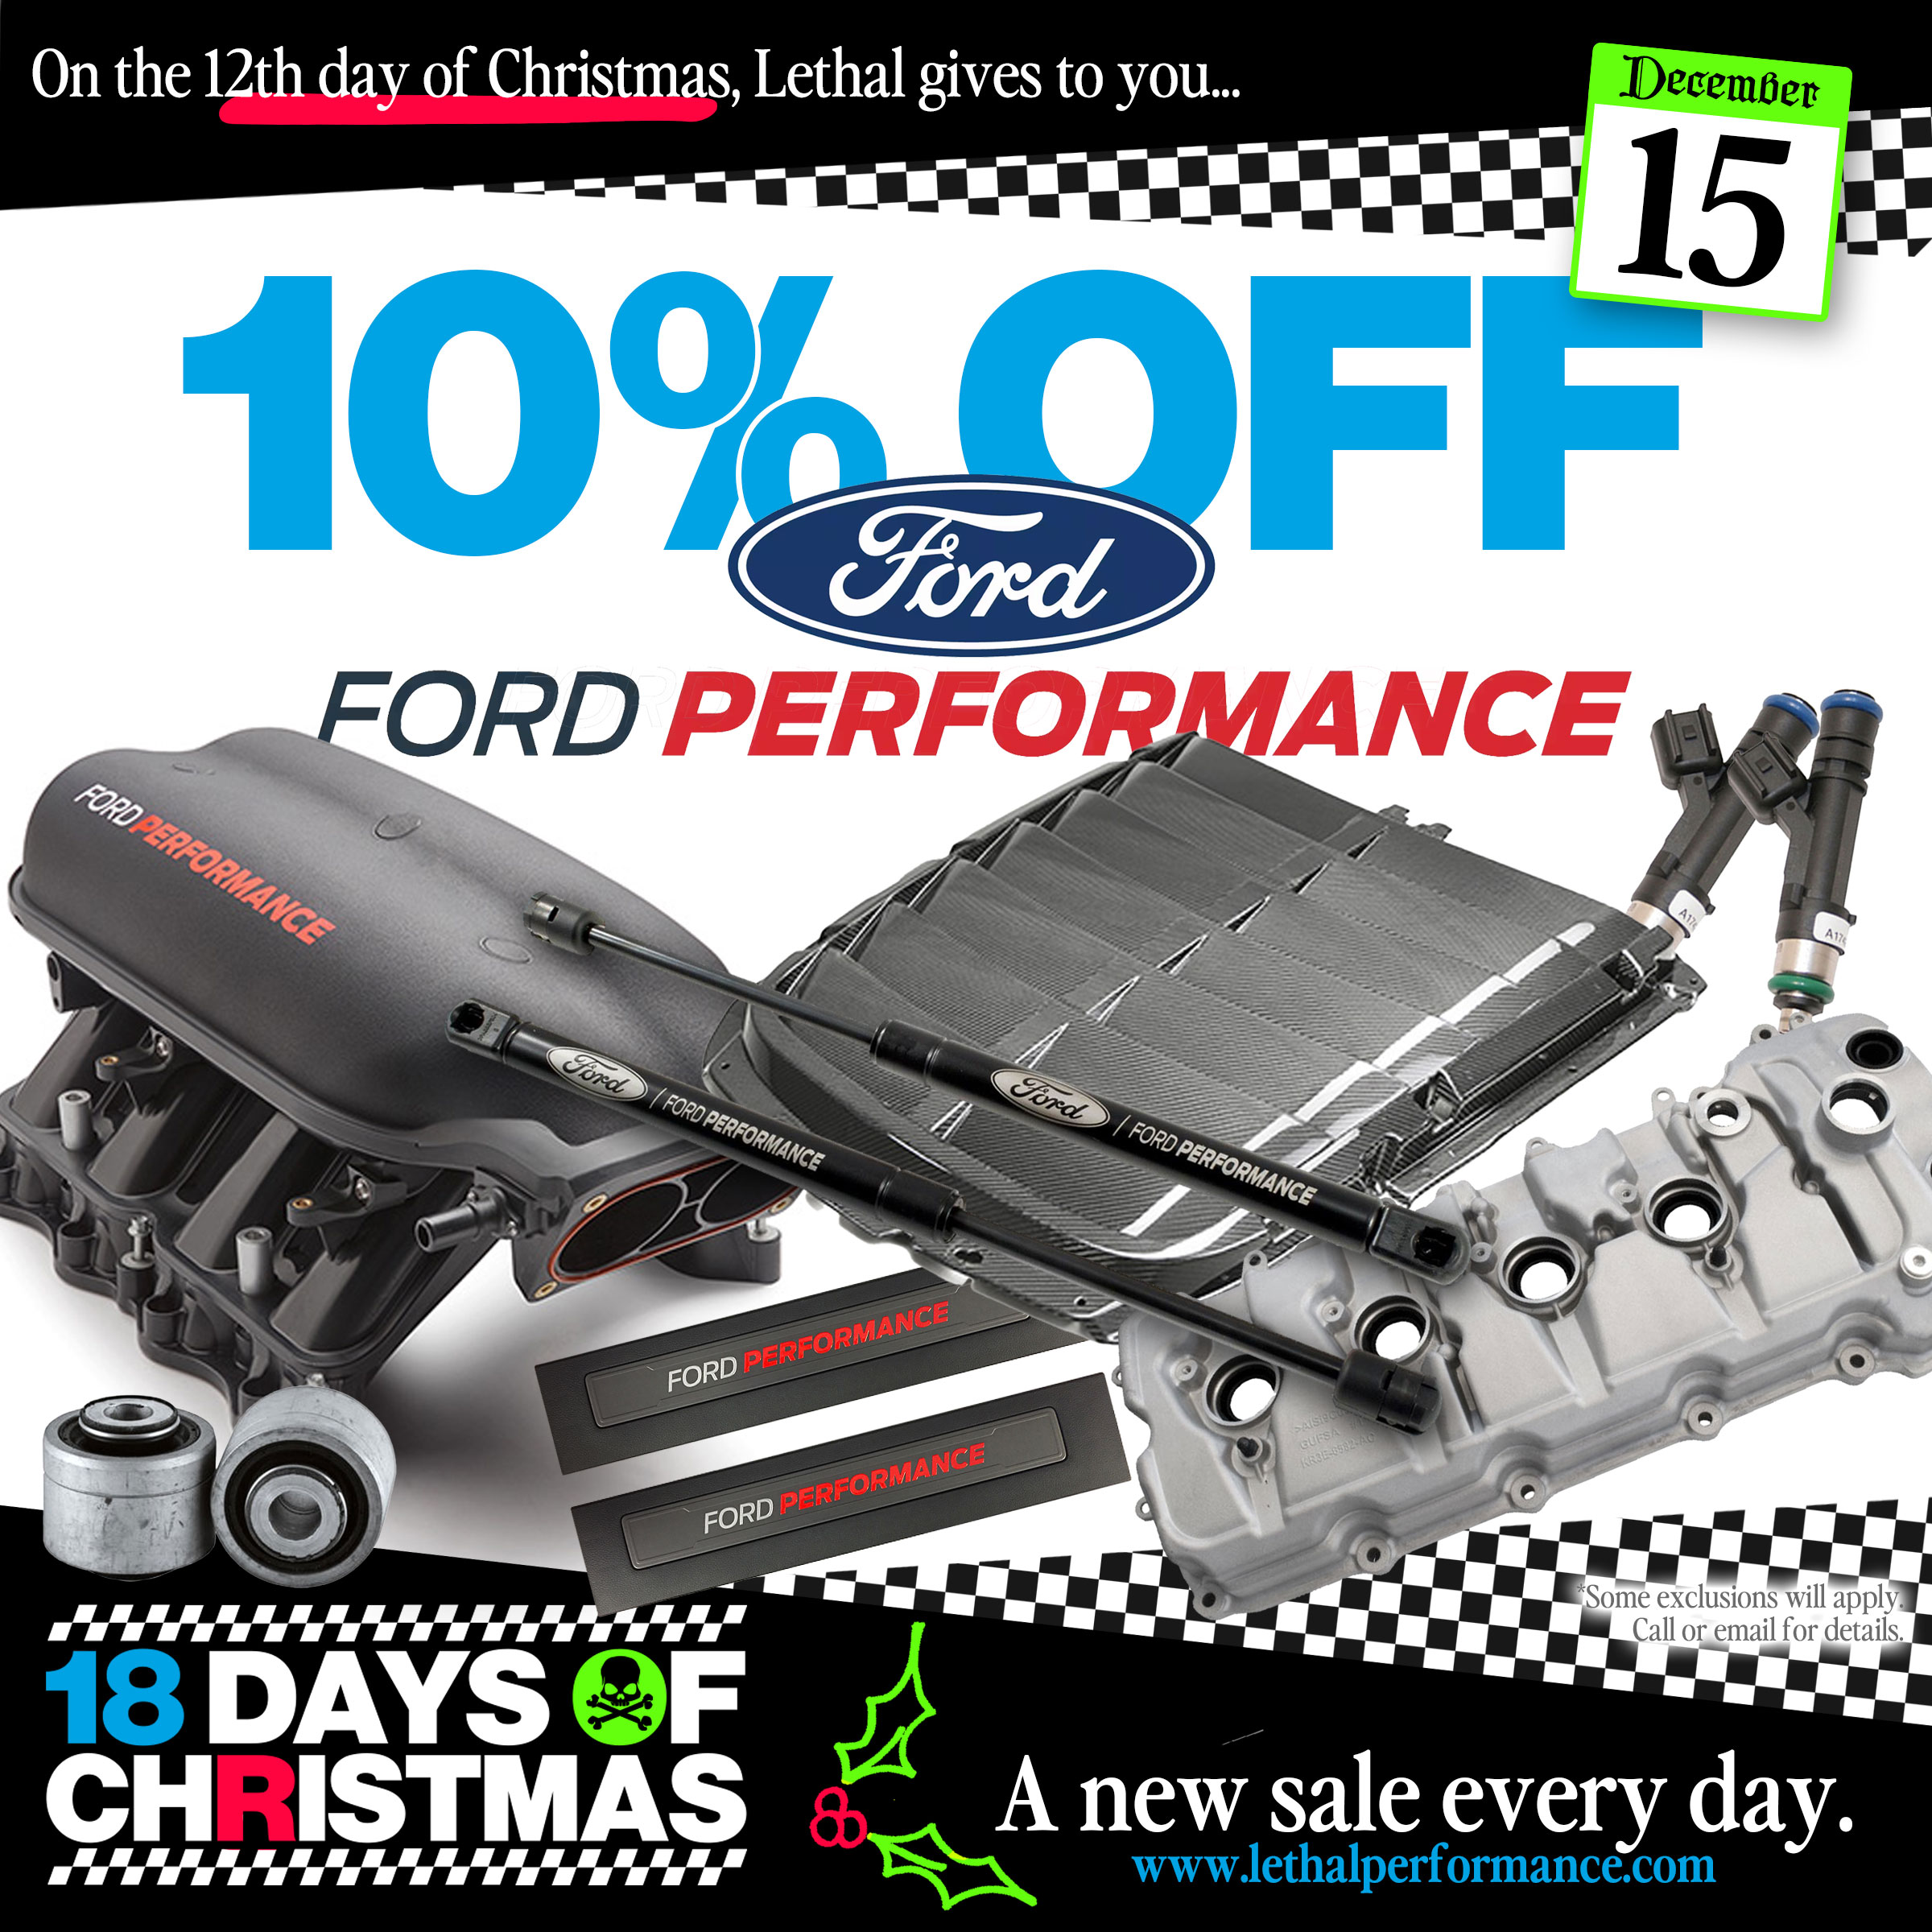 S650 Mustang Lethal Perfomance's 18 Days of Christmas SALES START NOW!! FordPerformance (3)